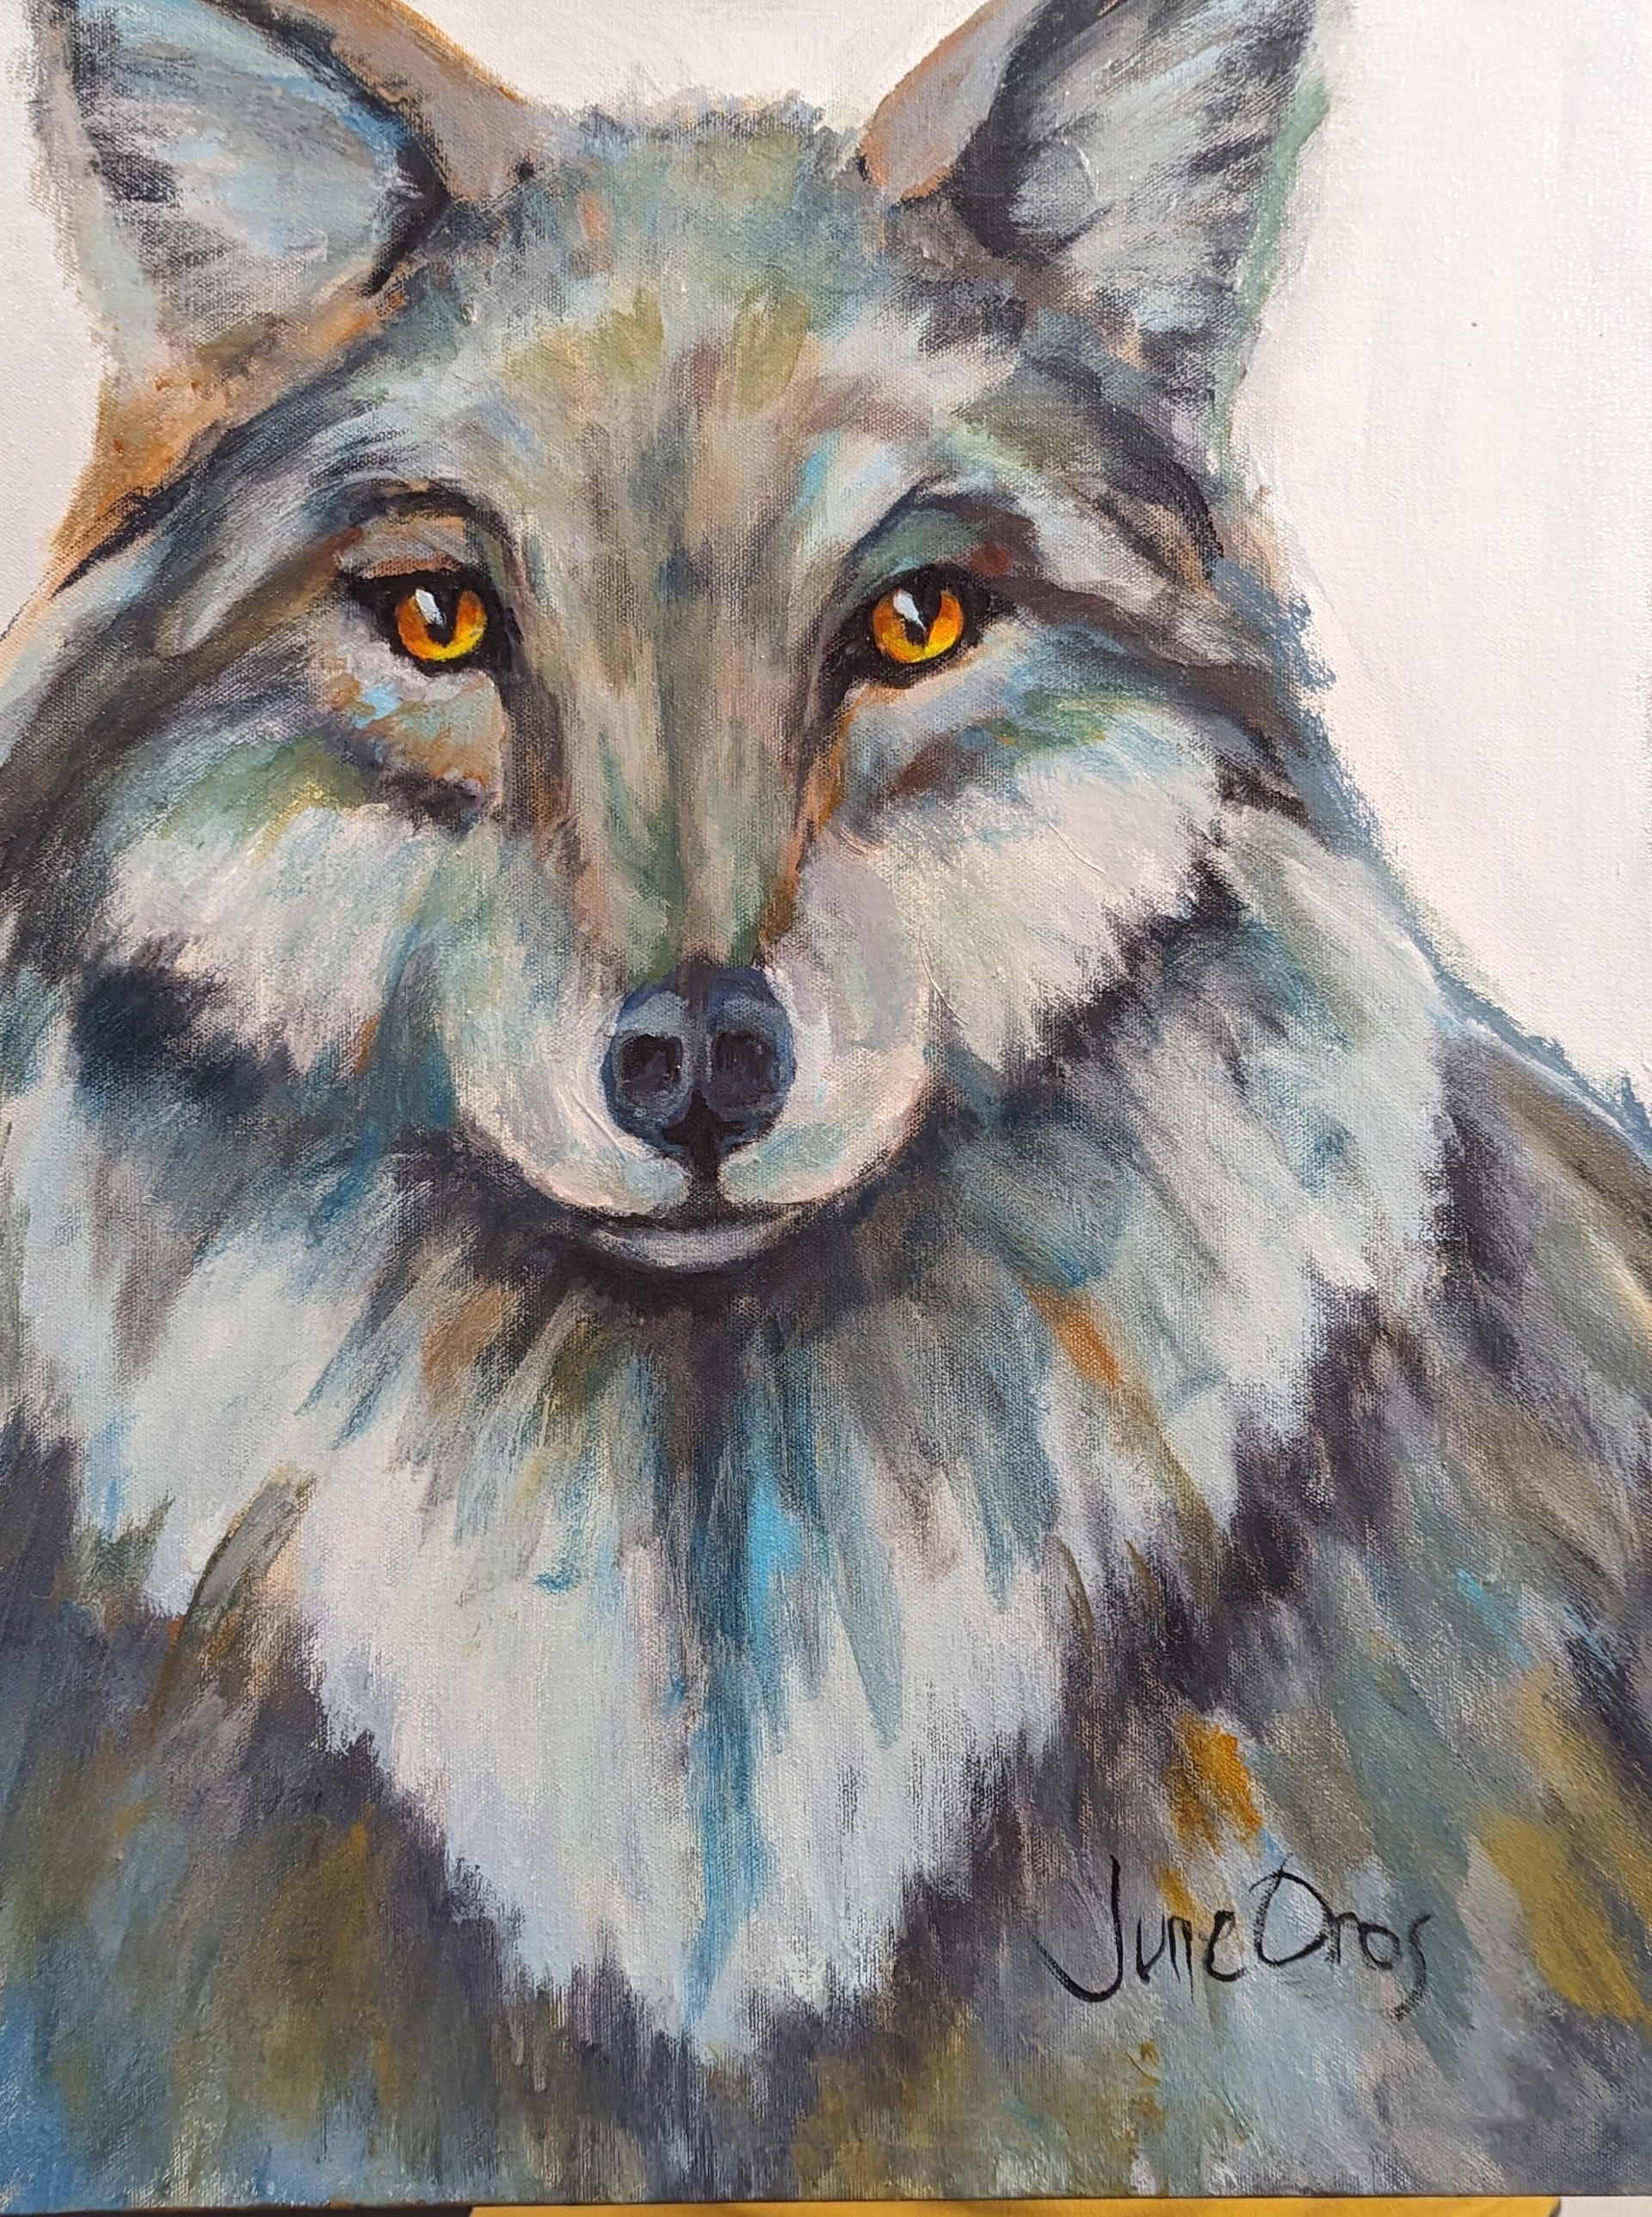 Portrait of the Wolf by June Oros